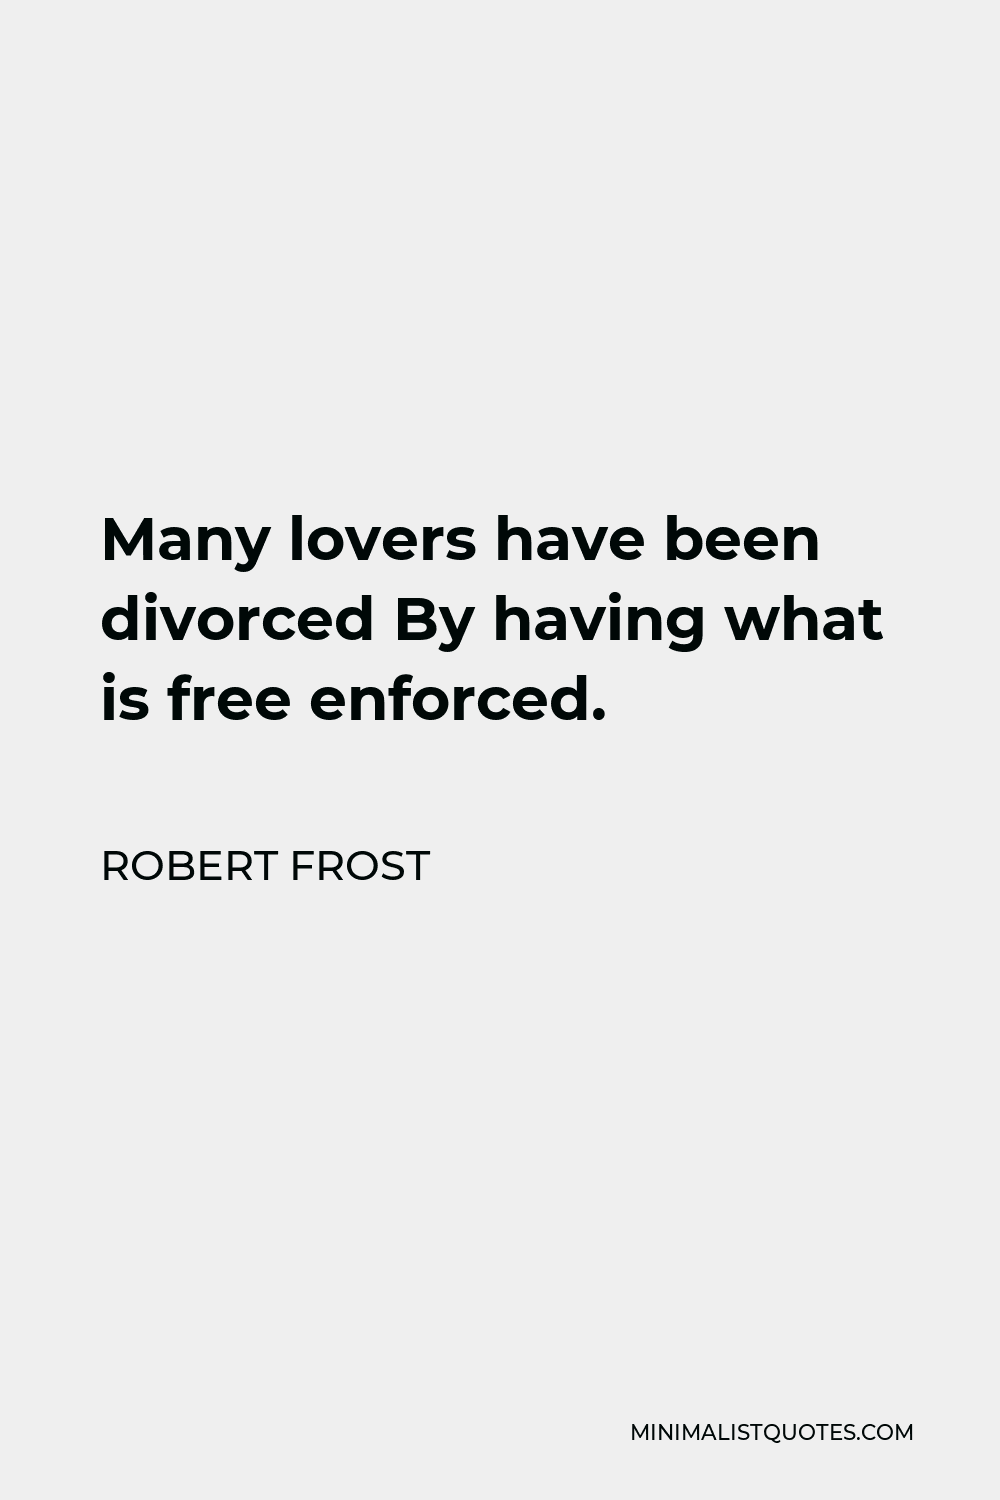 Robert Frost Quote - Many lovers have been divorced By having what is free enforced.